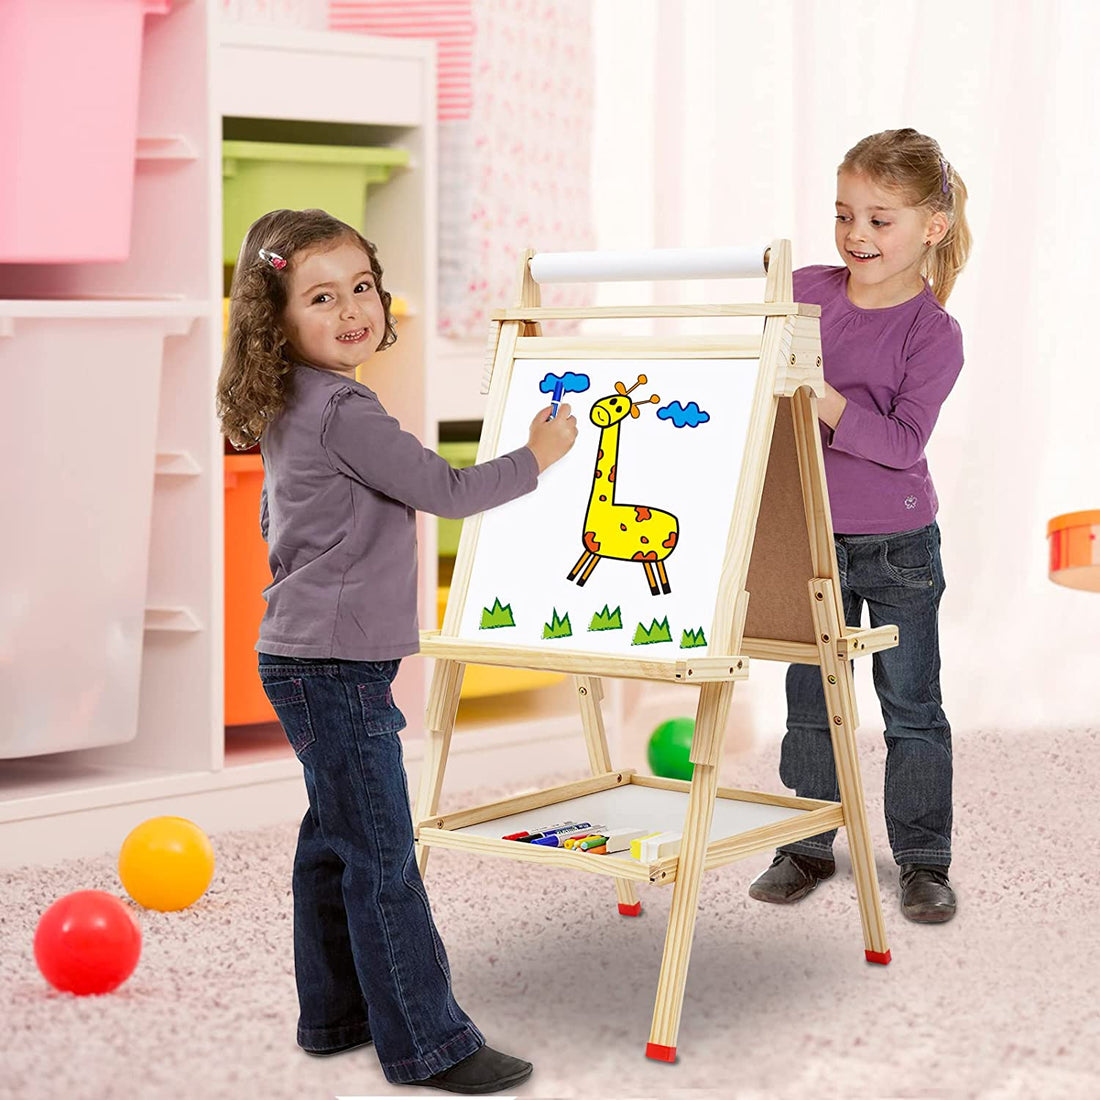 EALING BABY Art Easel - Wood Frame with Paper Roll - Natural Wood Colo –  duke-commerce